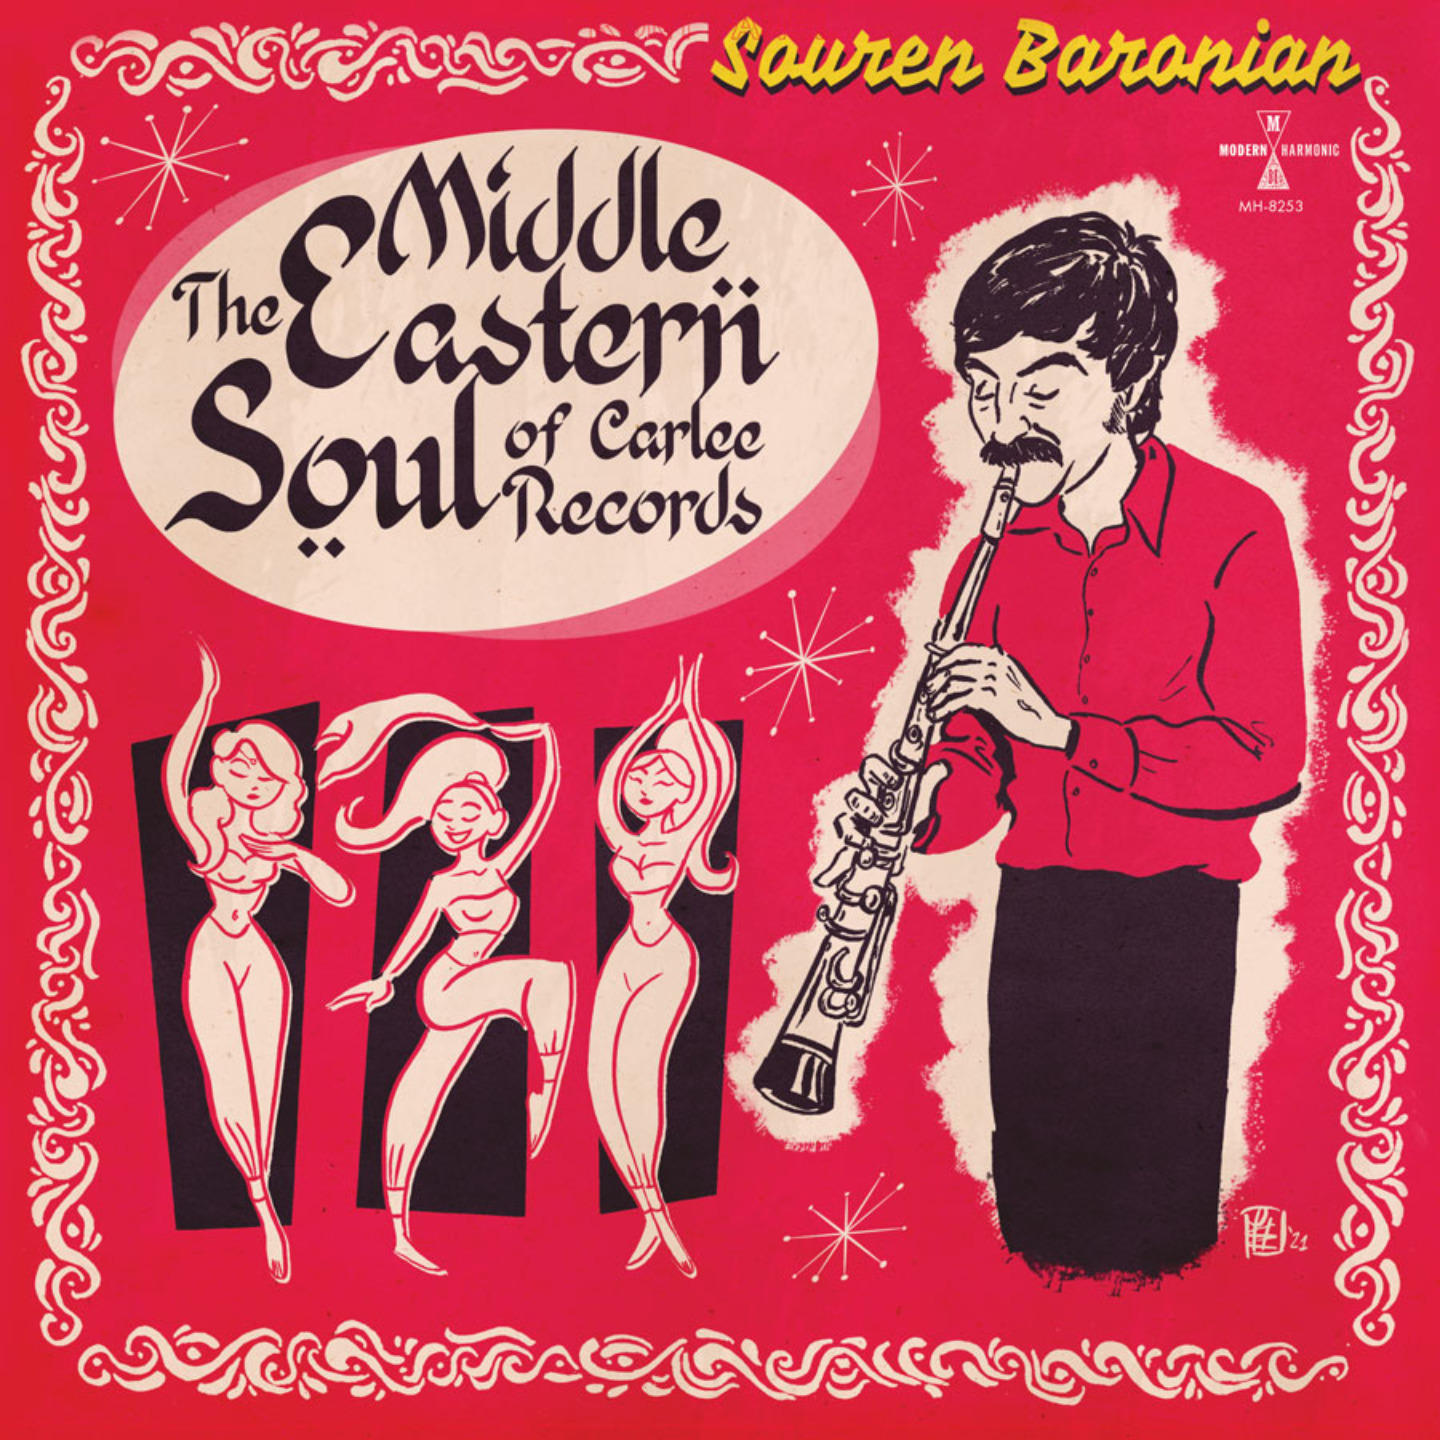 SOUREN BARONIAN - The Middle Eastern Soul Of Carlee Records 3xLP (Translucent Gold Vinyl)